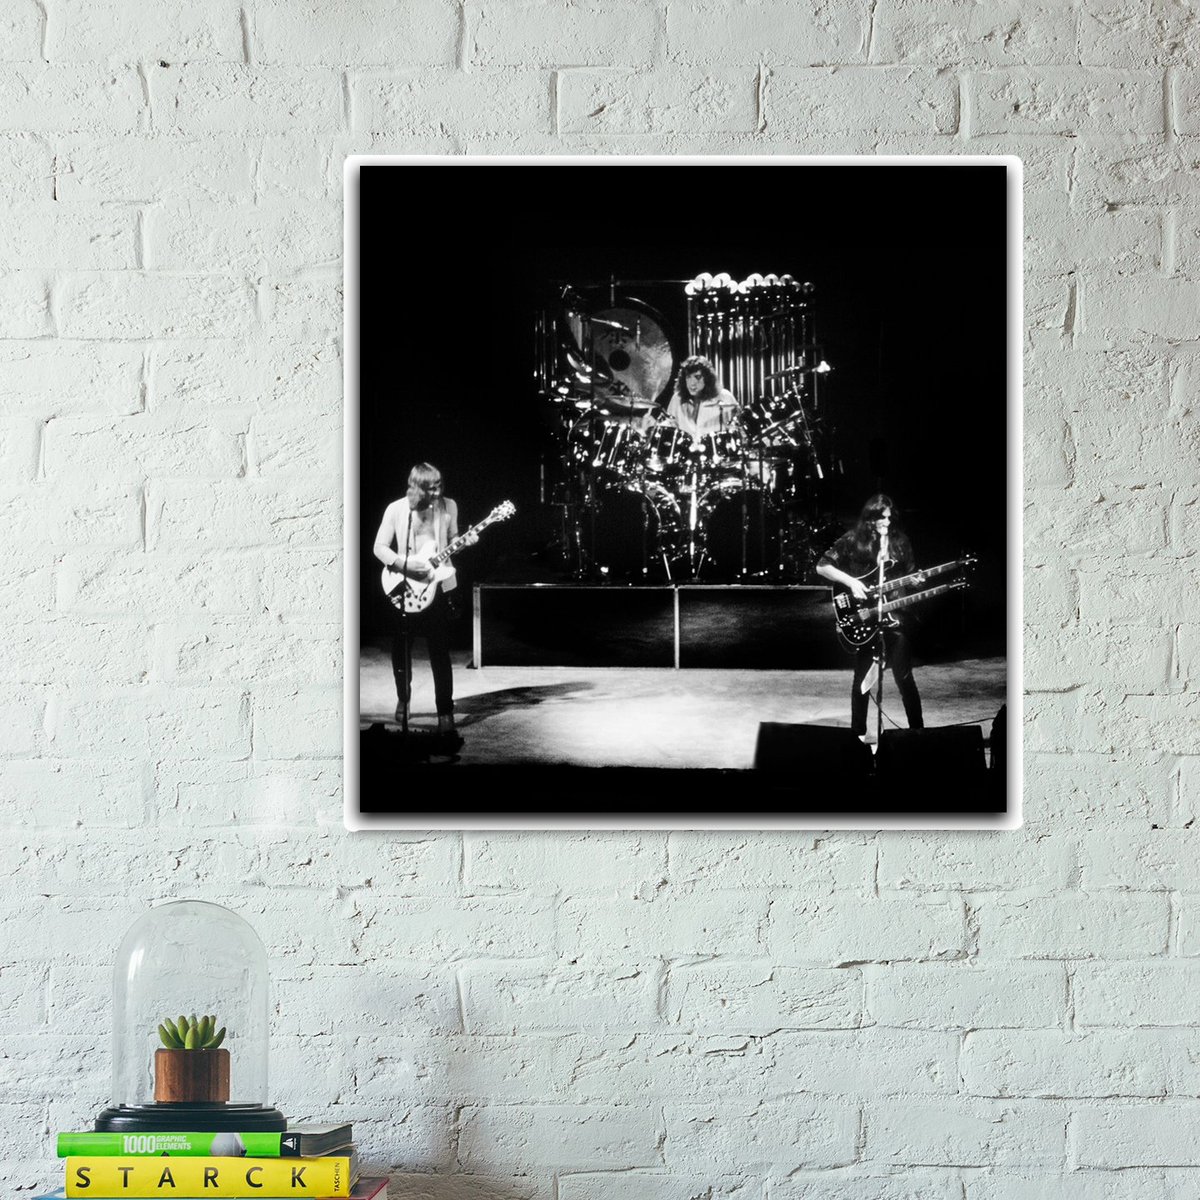 'RUSH '79' 📸 Philip C Perron - What a great gift for a Rush fan. I shot this 46 years ago. Where has the time gone? #perronfineartprints #philipperronphotography 
@hamiltoncitymag @thehammermonthly
@hamartscouncil #rush #geddylee #alexlifeson 
#neilpeart